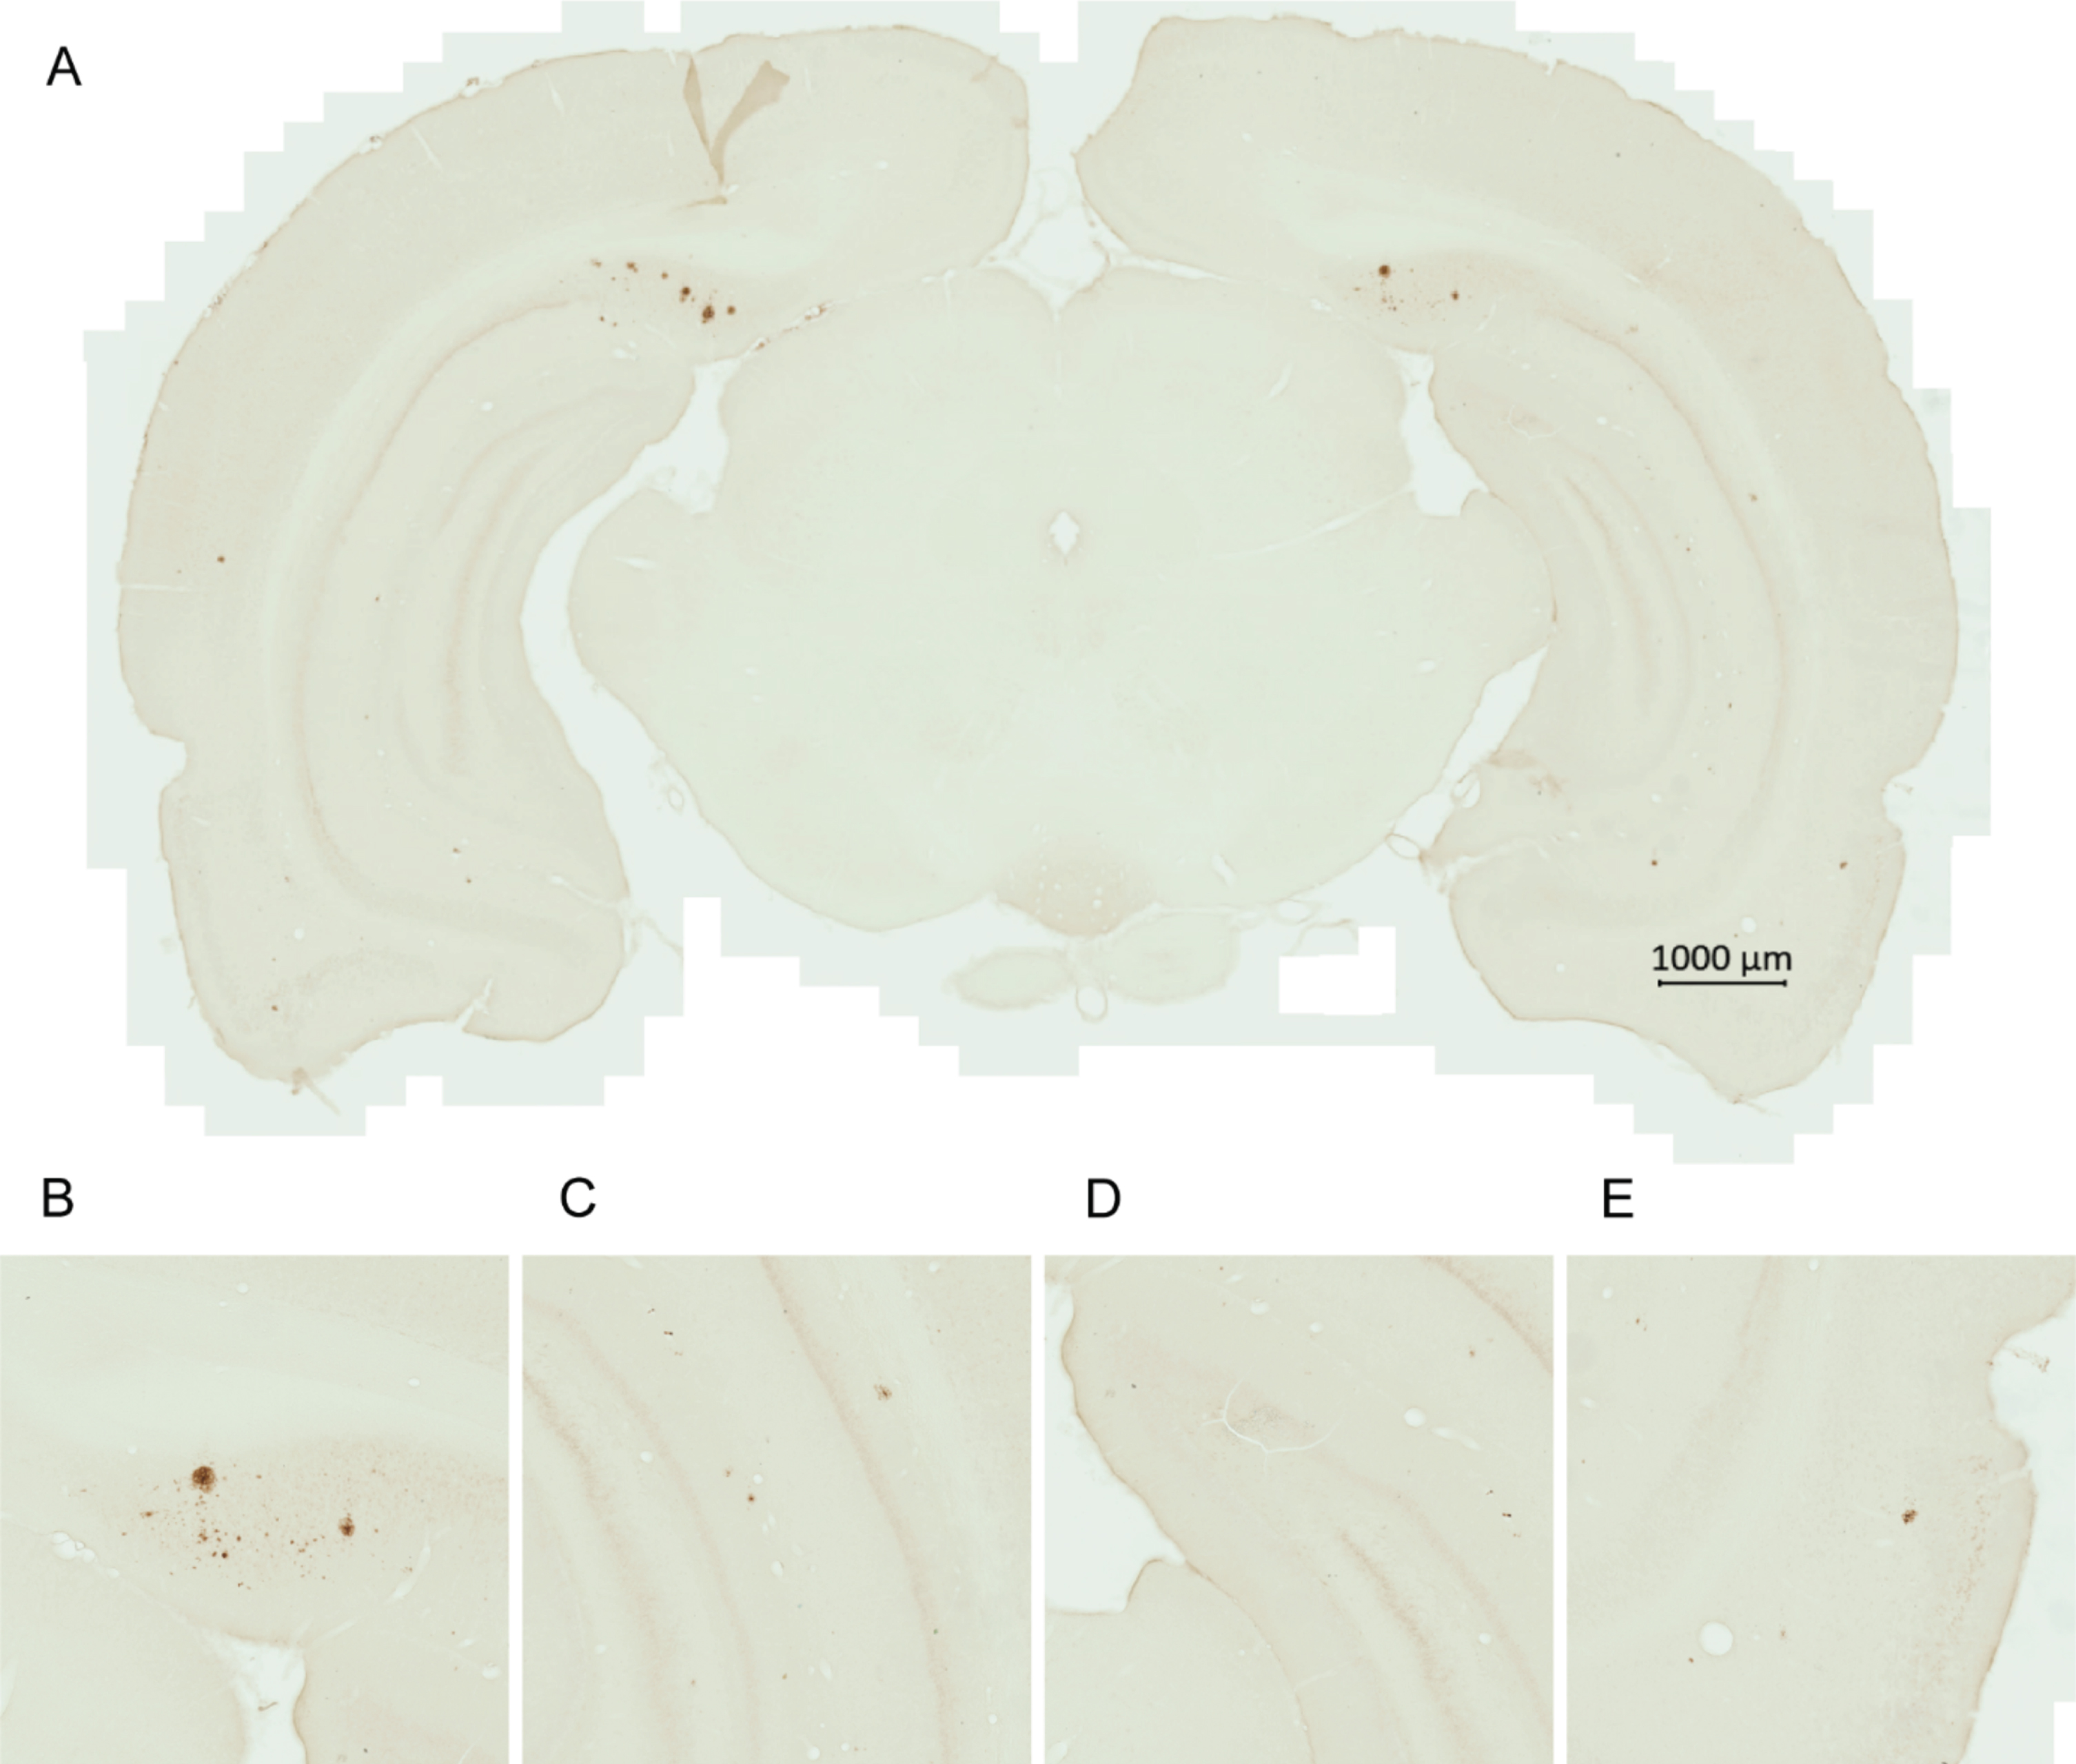 Amyloid plaques in the brain of a transgenic AD rat. A representative image of a brain section from a 6.8-month-old untreated male transgenic AD rat shows early amyloid plaque pathology (A). Majority of the plaques were within the subiculum (B), with less plaques seen in the cornu ammonis (C), dentate gyrus (D), and entorhinal cortex (E).